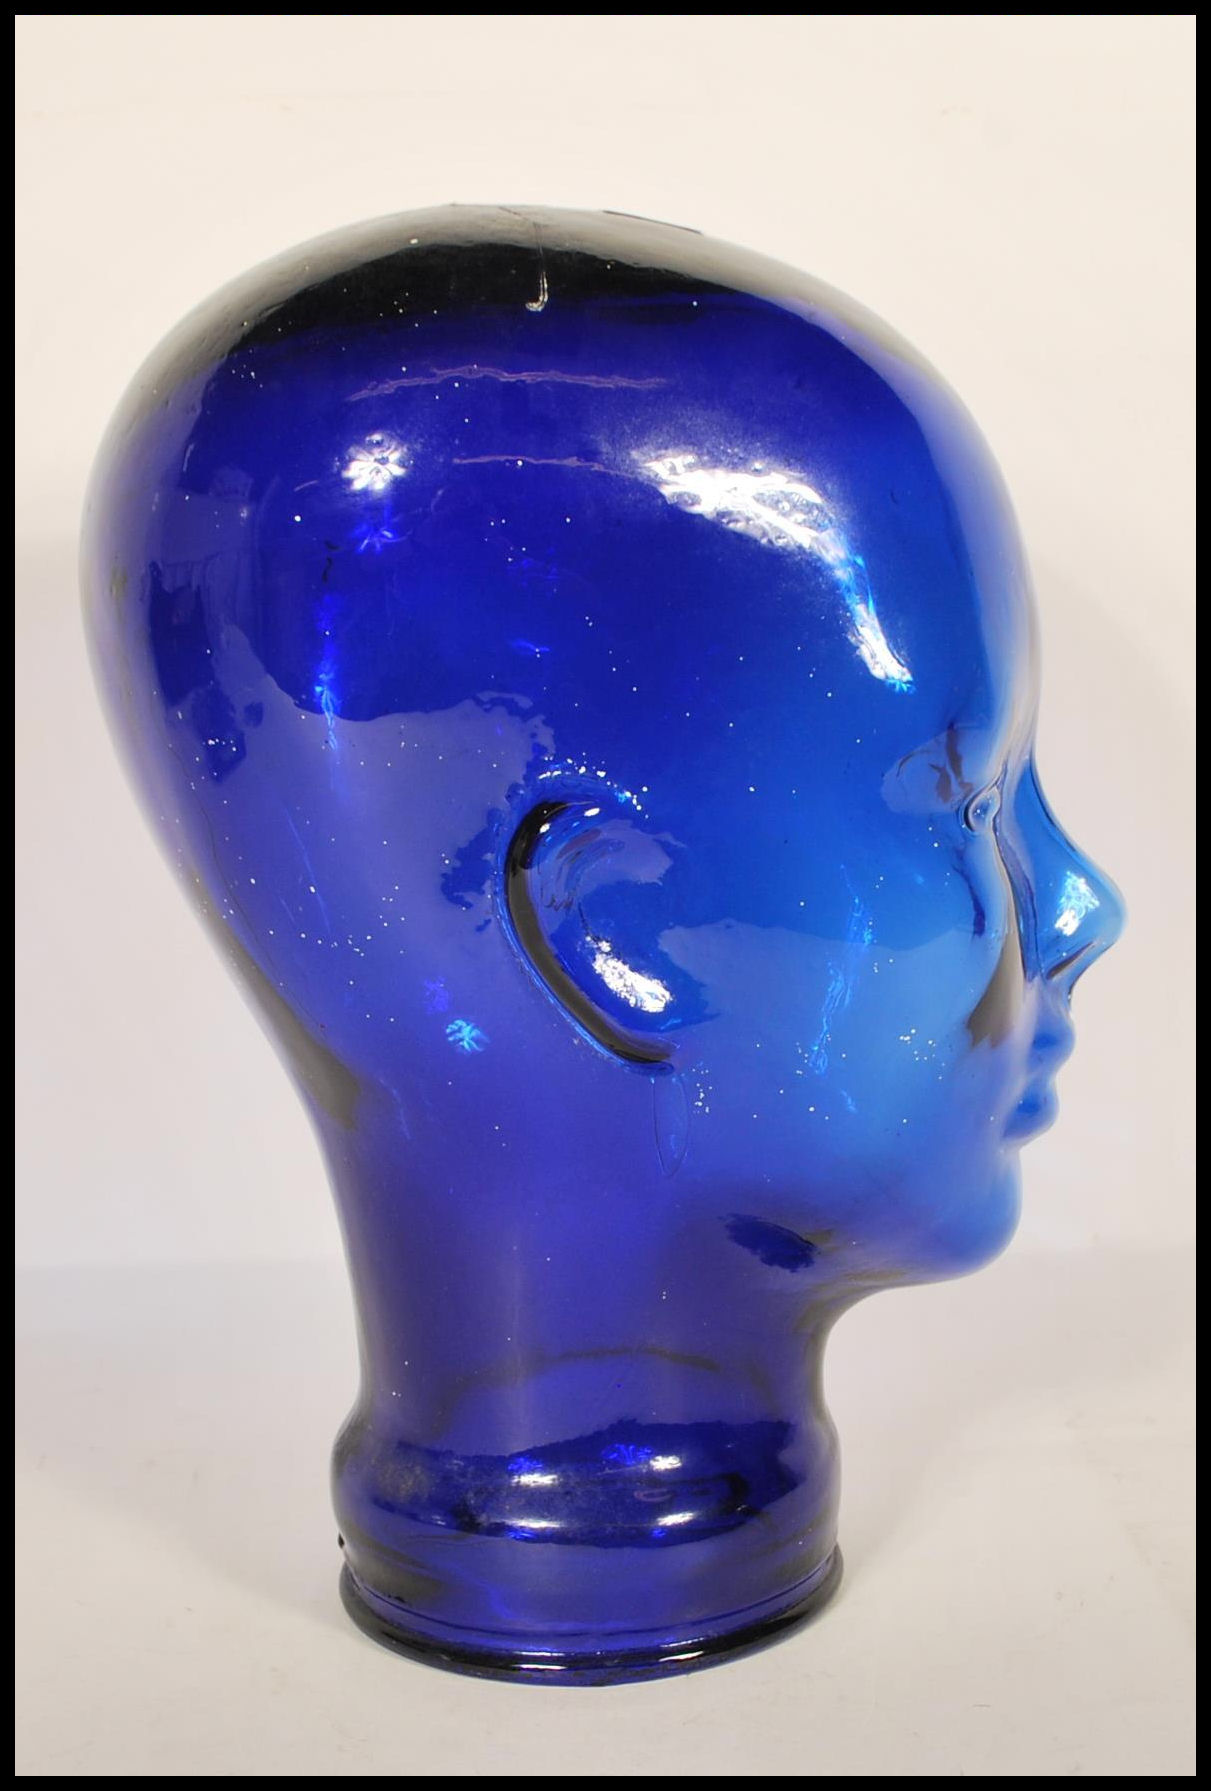 A 20th century art deco style moulded pressed glass phrenology type head - shop display stand / - Image 2 of 5